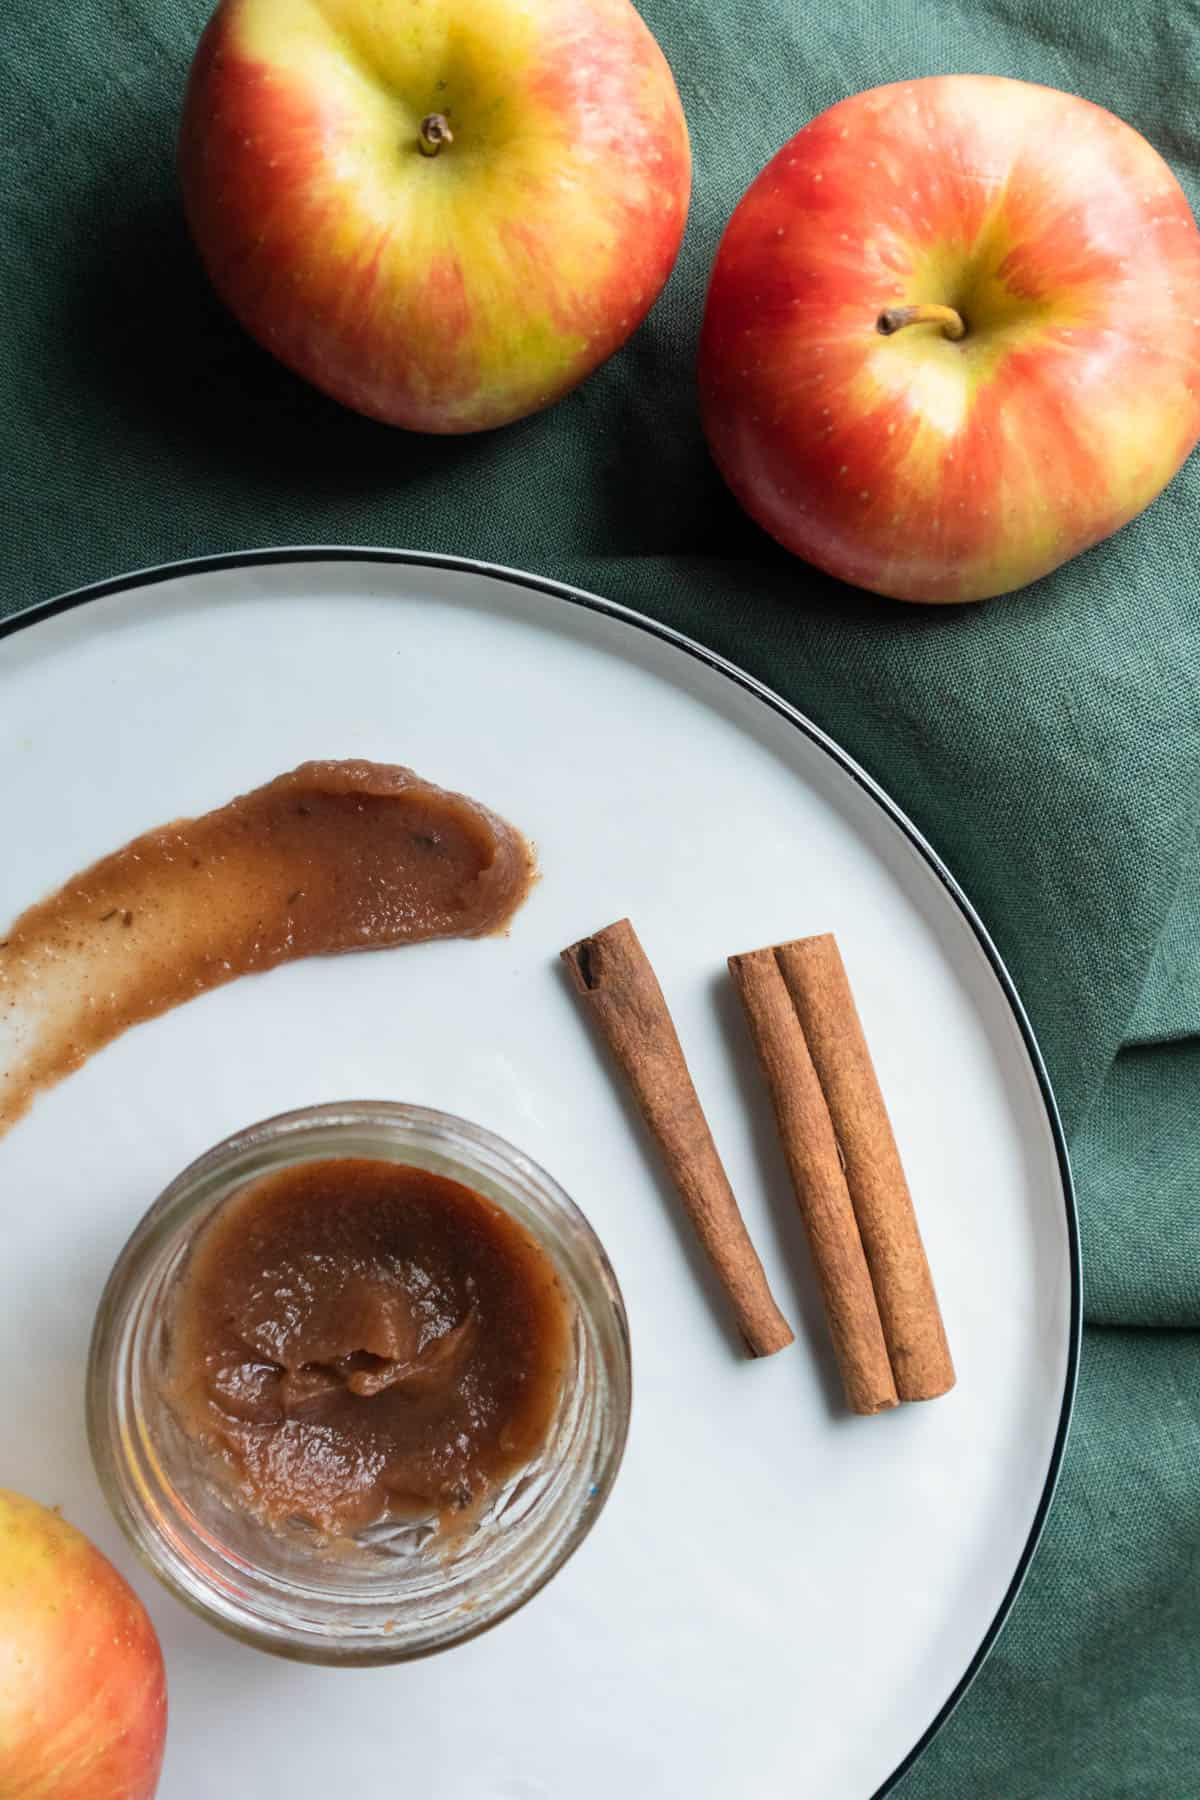 A jar of homemade old fashioned apple butter